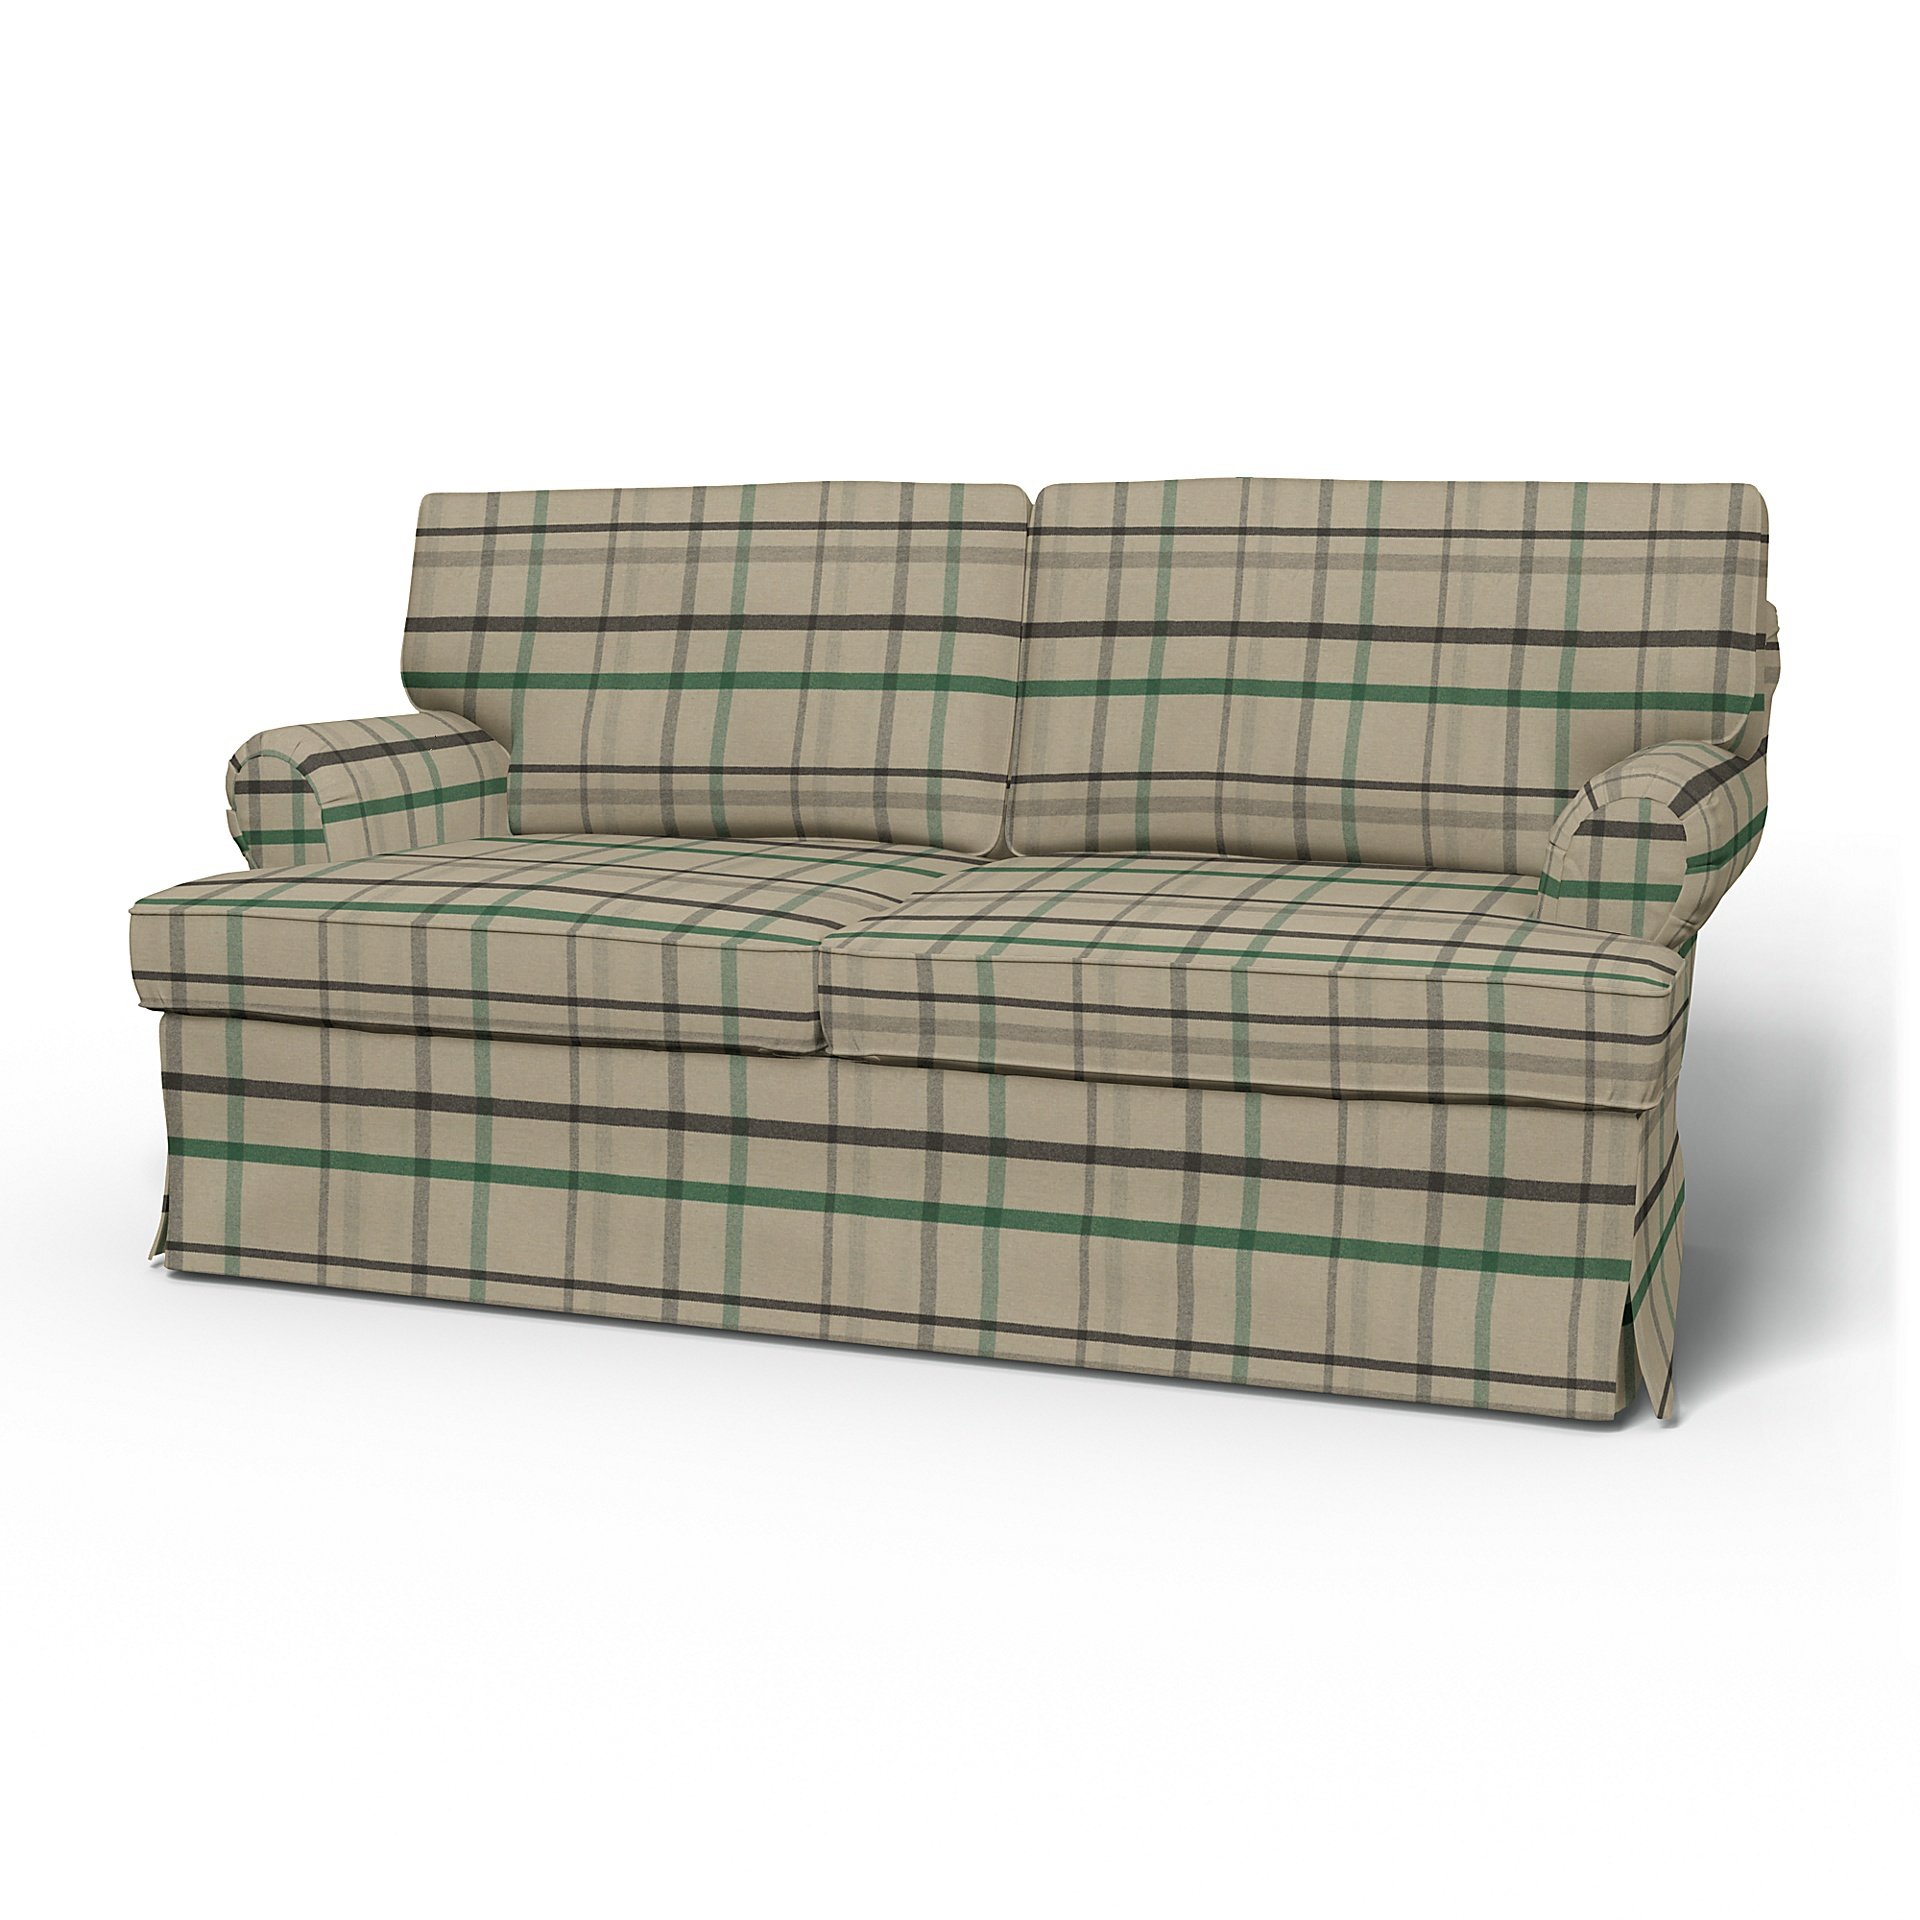 IKEA - Stockholm 2 Seater Sofa Cover (1994-2000), Forest Glade, Wool - Bemz